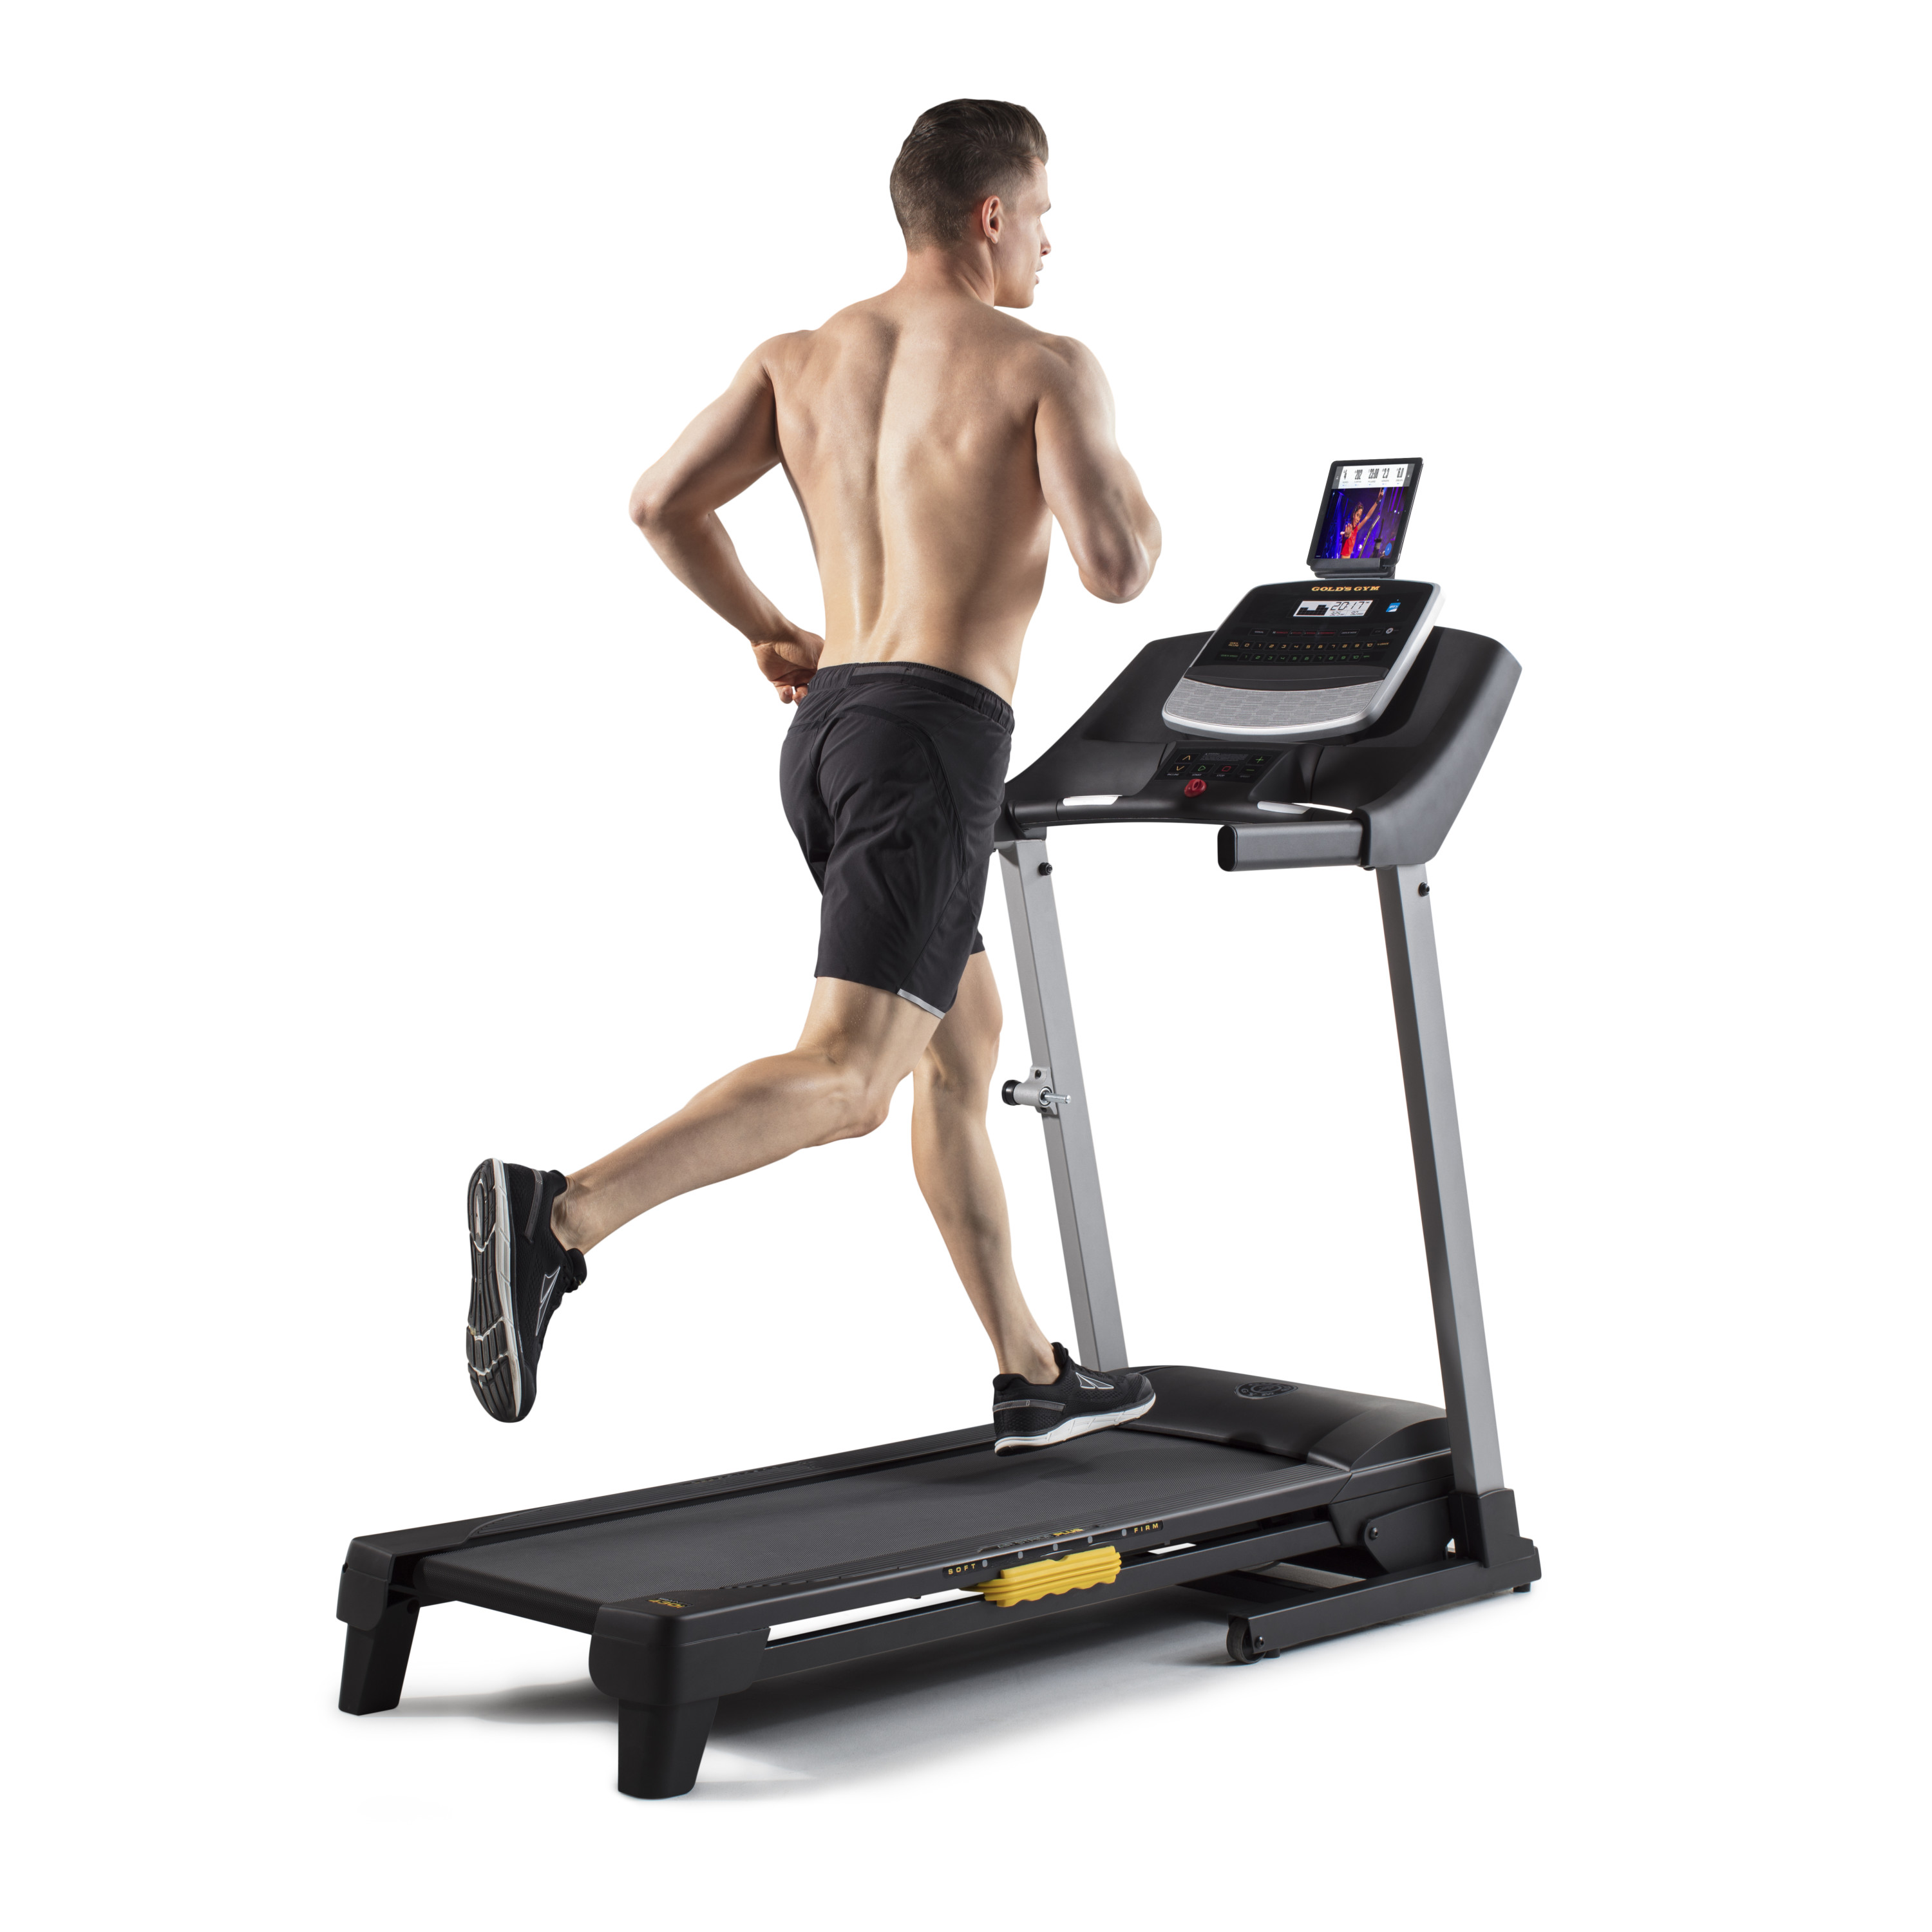 ProForm Trainer 430i Folding Smart Treadmill with 10% Incline, iFit Bluetooth Enabled - image 16 of 18